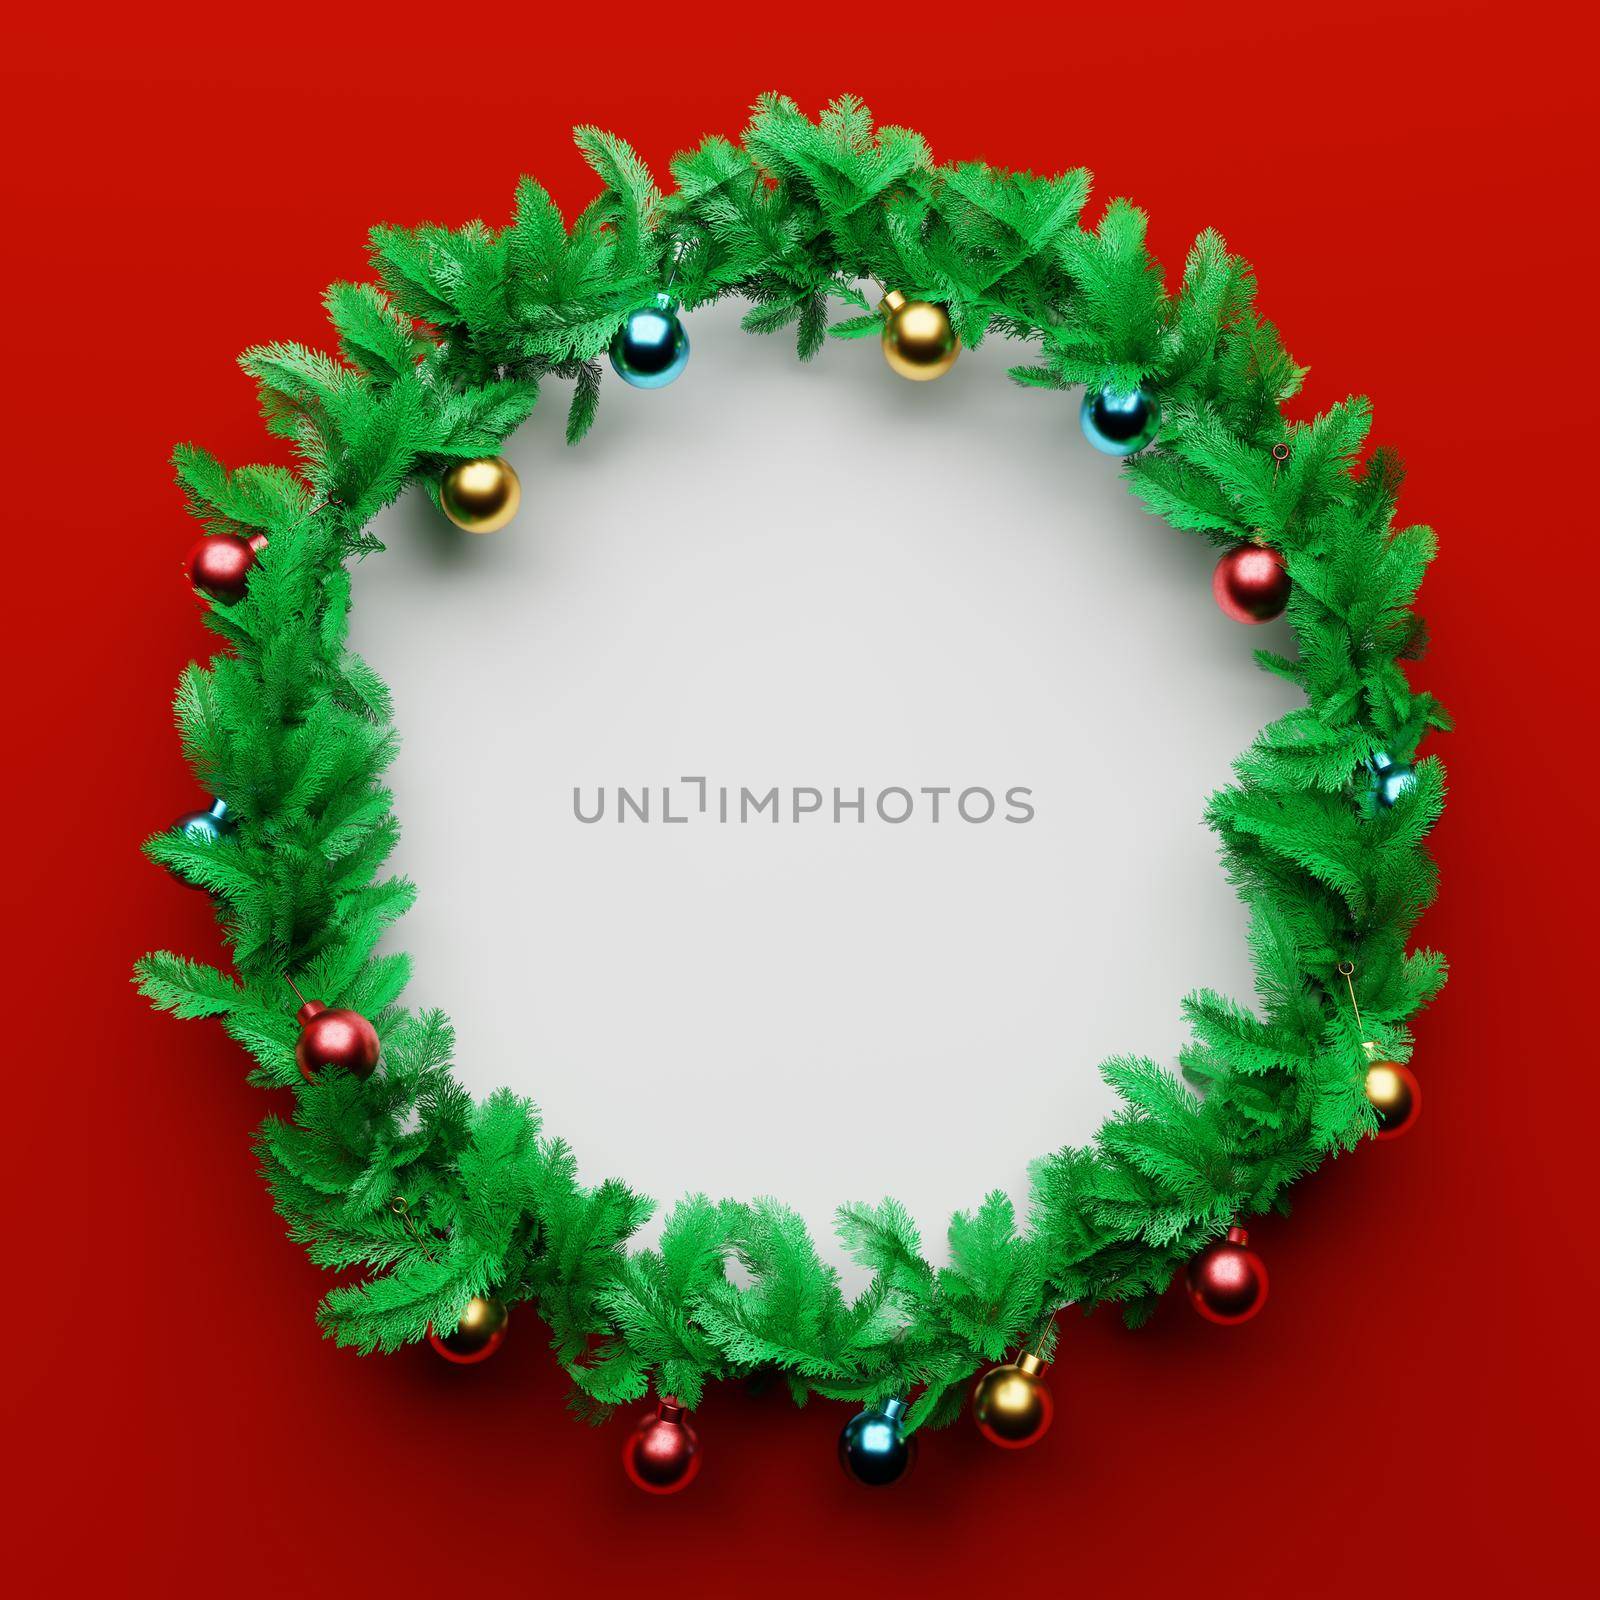 Christmas garland pine decoration with empty space in the middle on red and white background. Xmas holiday culture and new year concept. 3D illustration rendering by MiniStocker